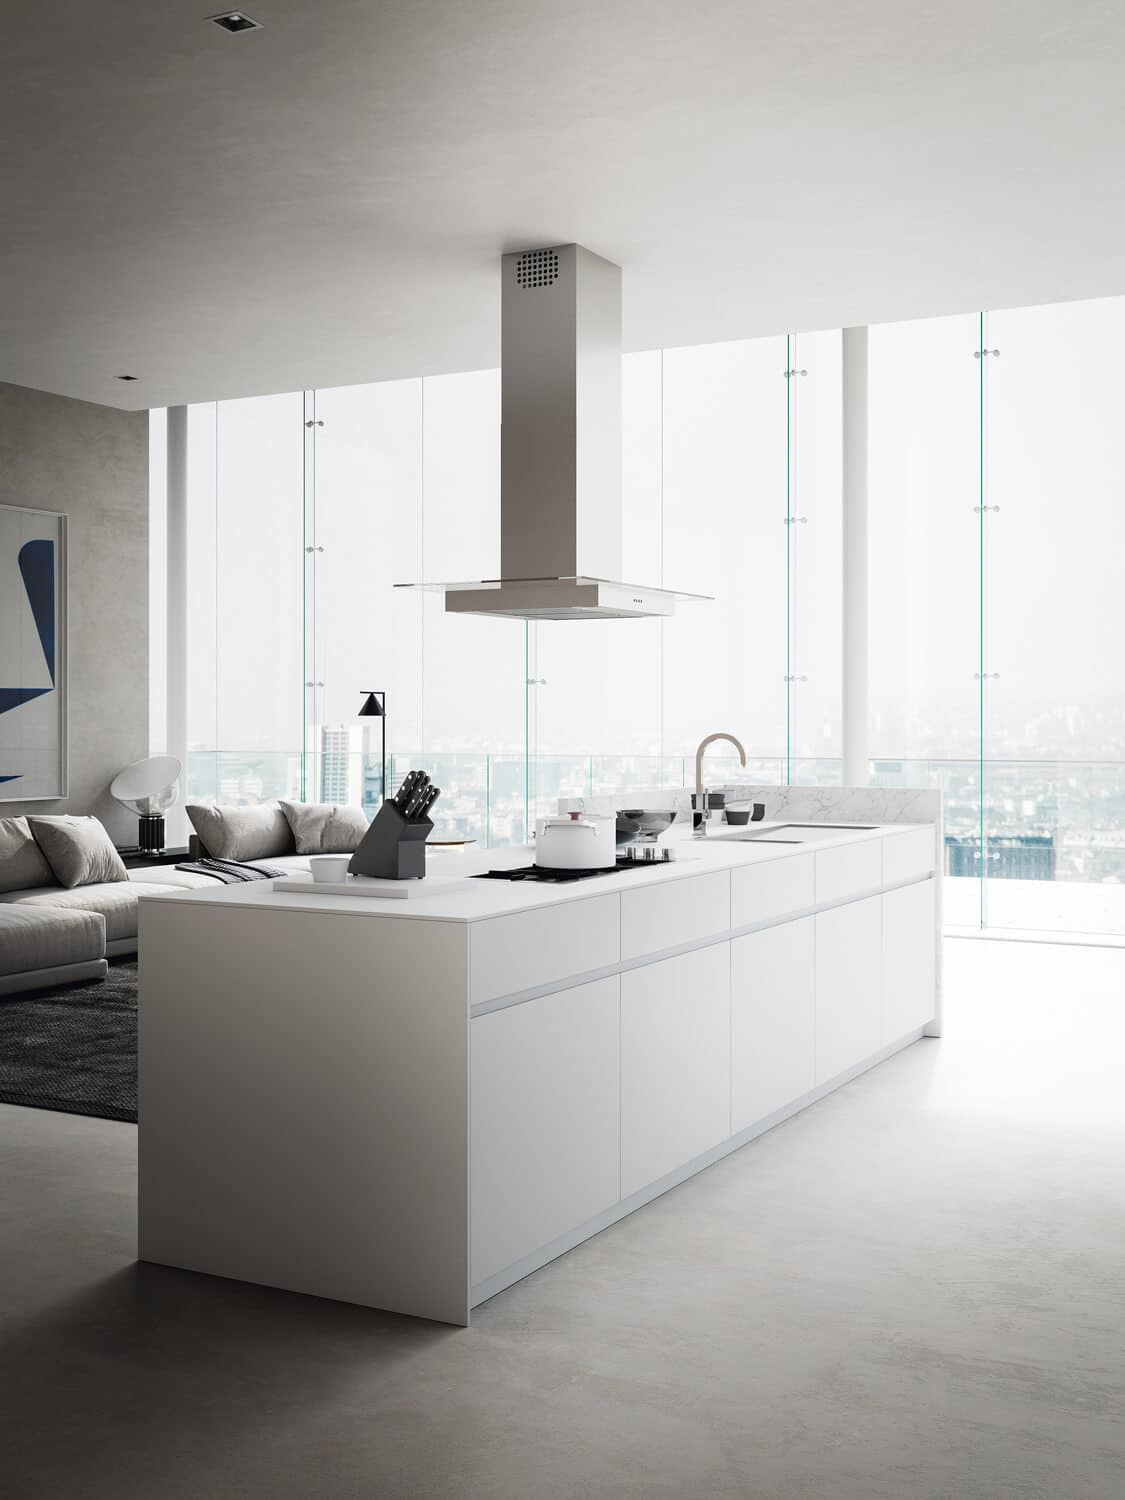 The integrated channel in White painted aluminum creates a visual continuum with the cabinets. 